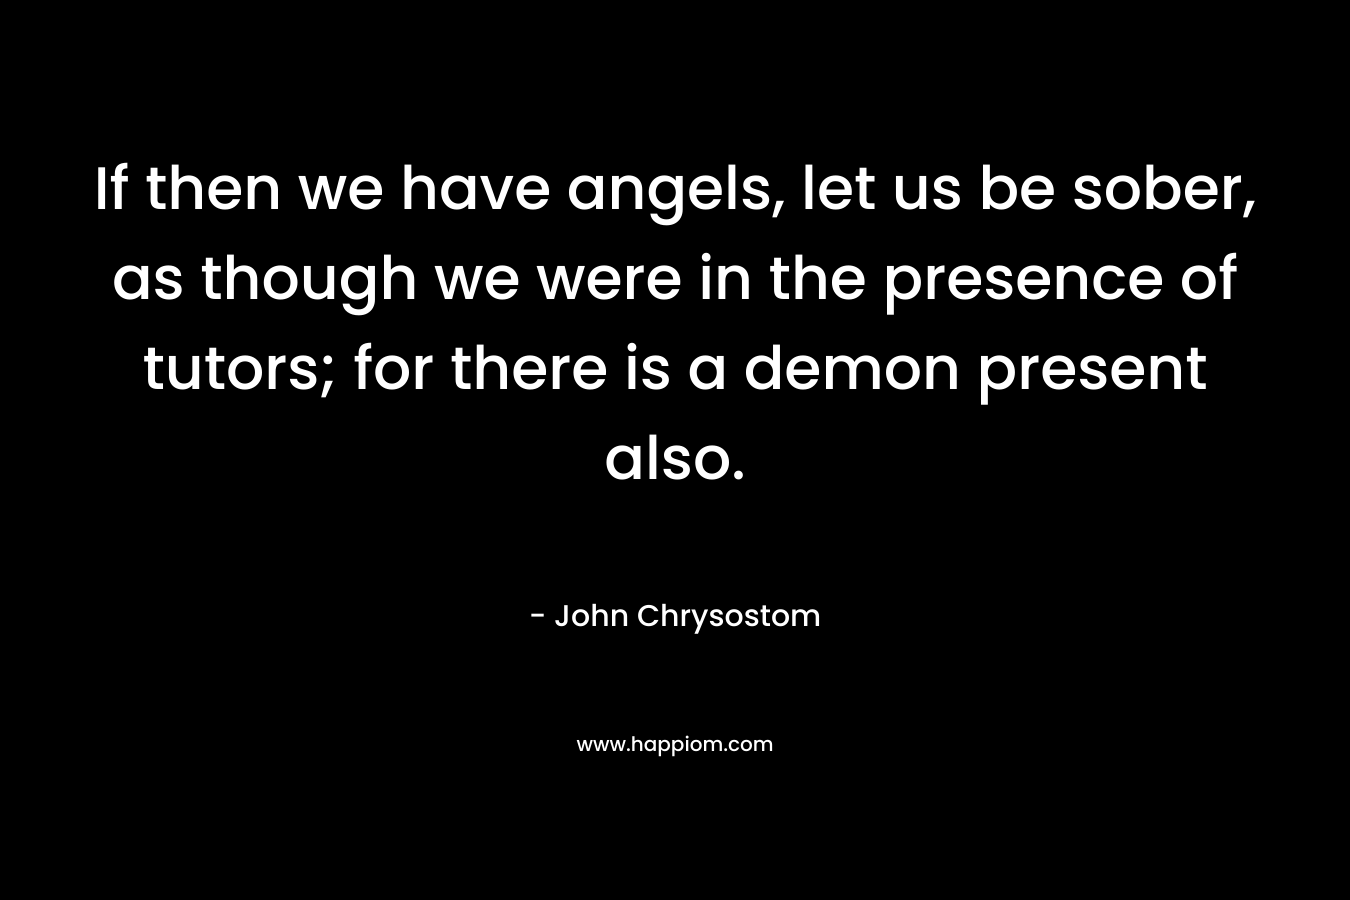 If then we have angels, let us be sober, as though we were in the presence of tutors; for there is a demon present also. – John Chrysostom